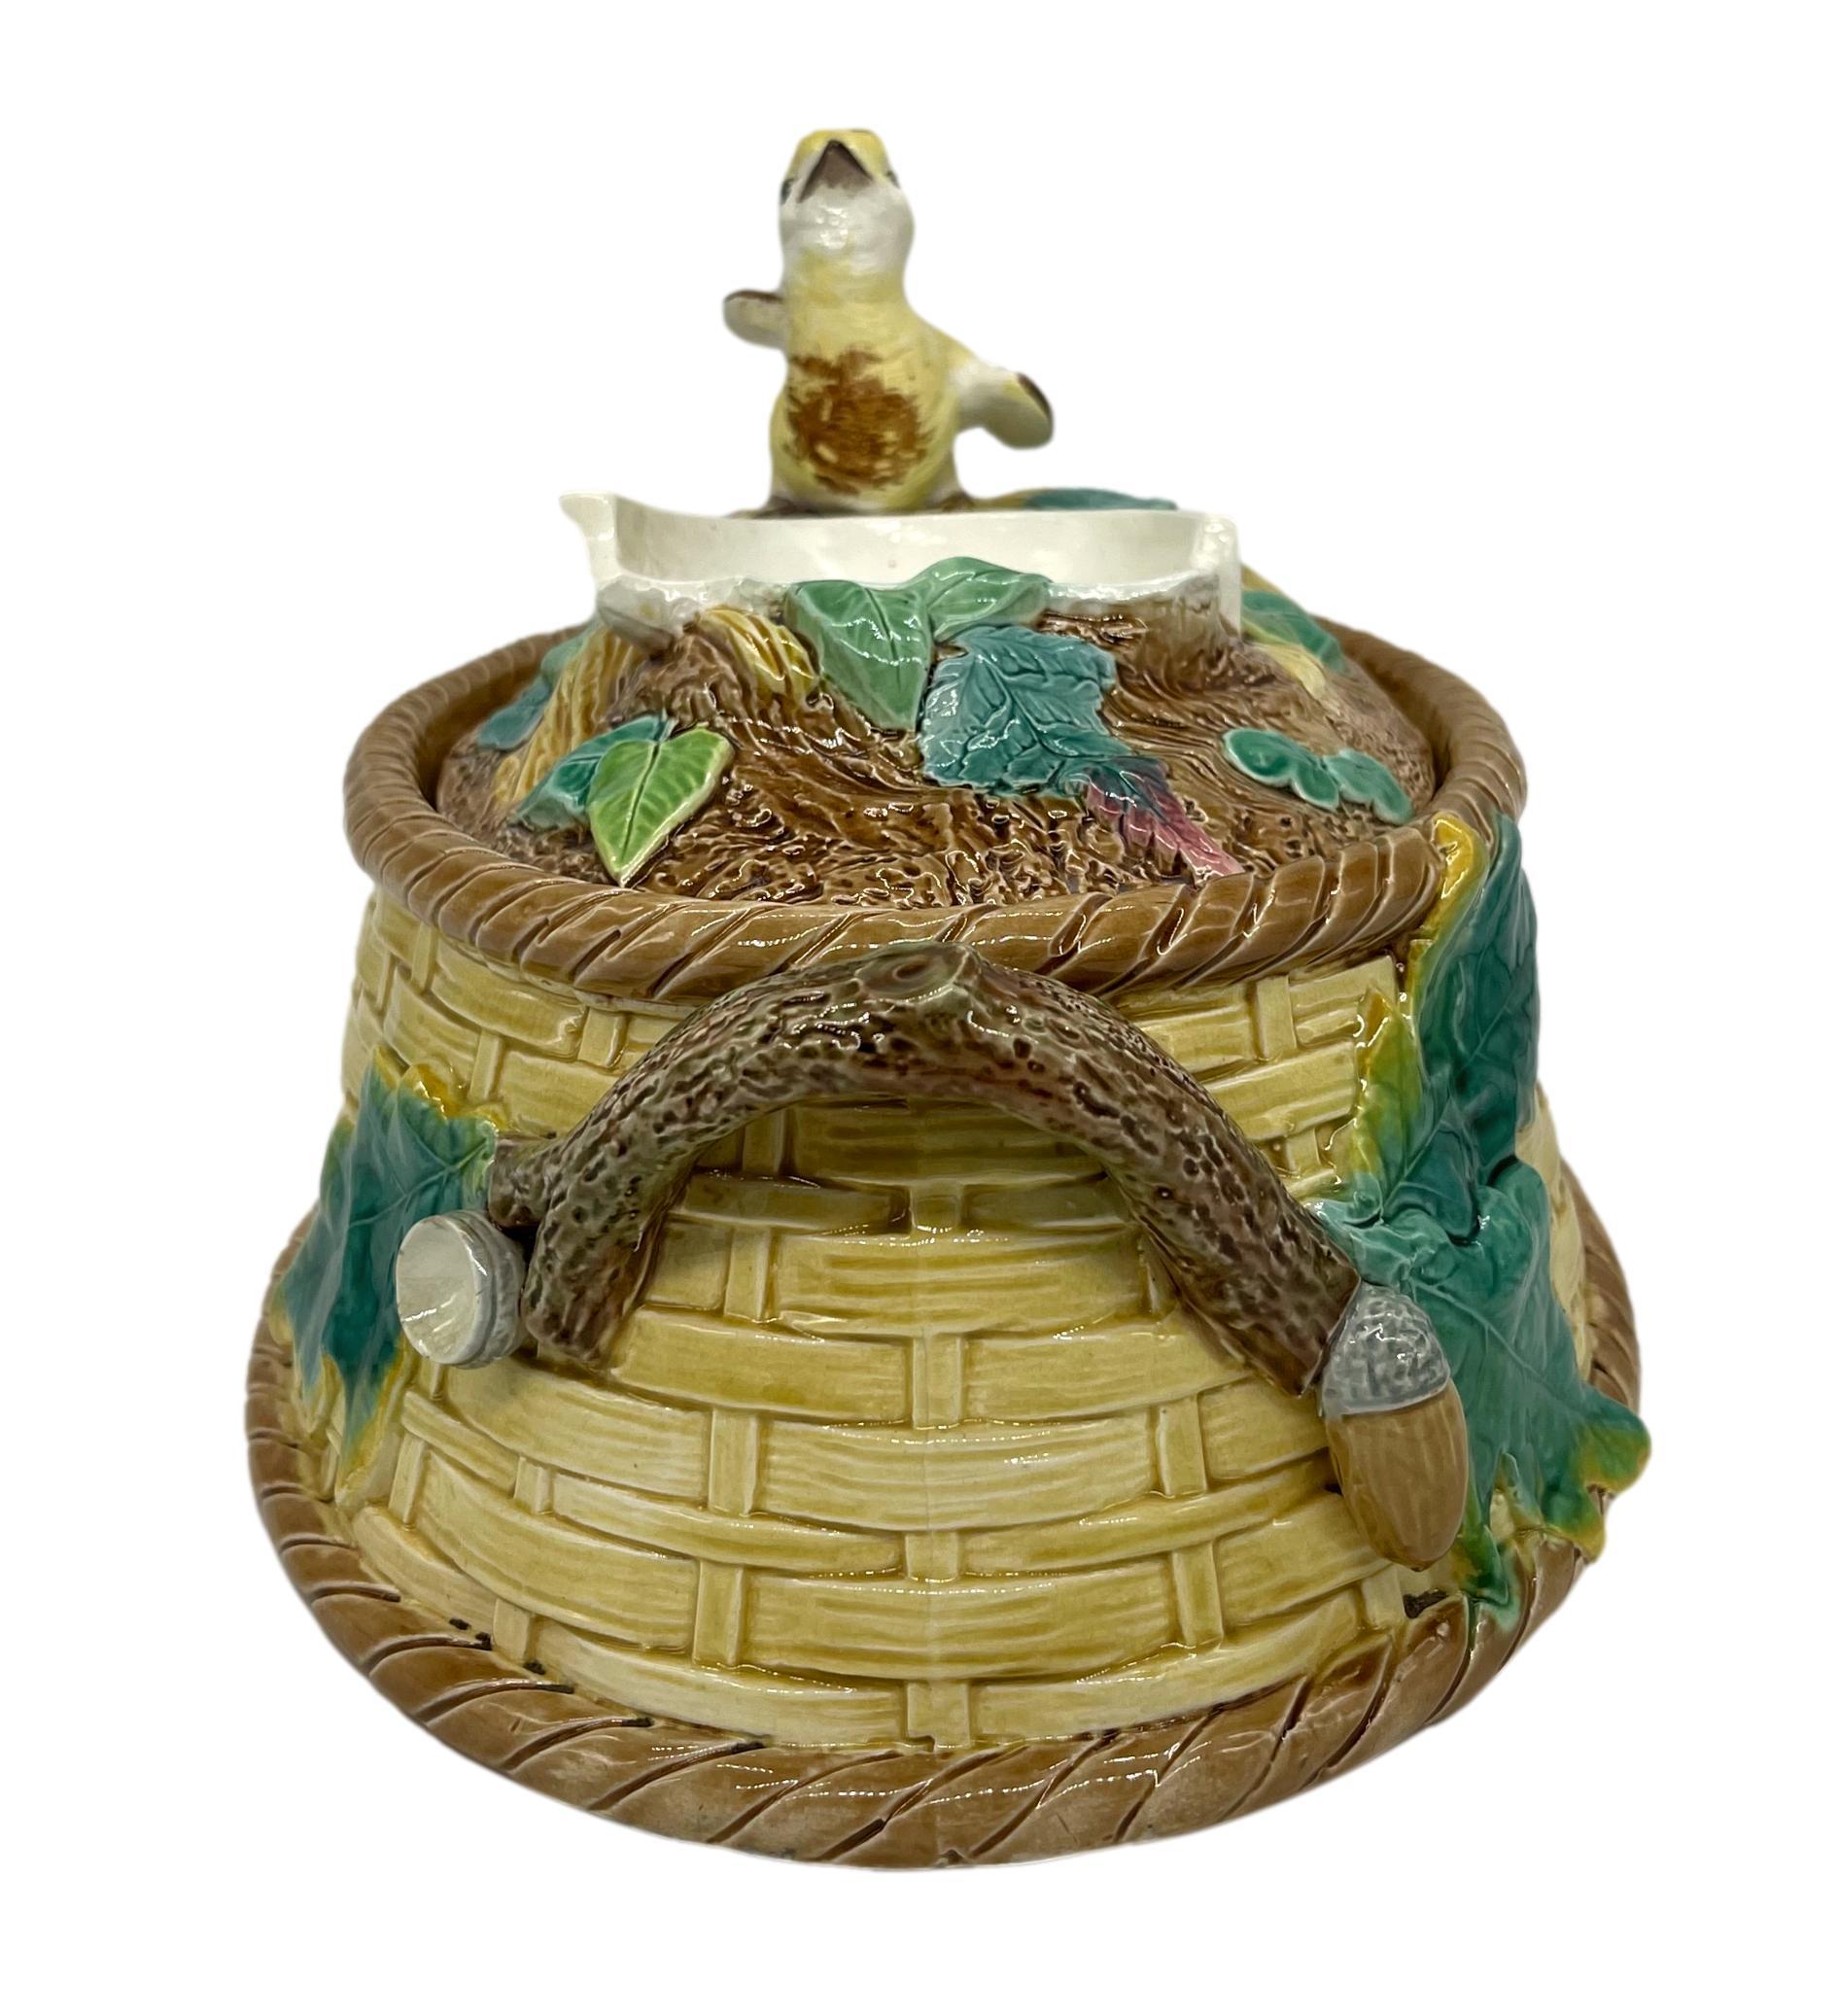 Molded Brown-Westhead, Moore Majolica Game Tureen with Grouse Chick, English, ca. 1875